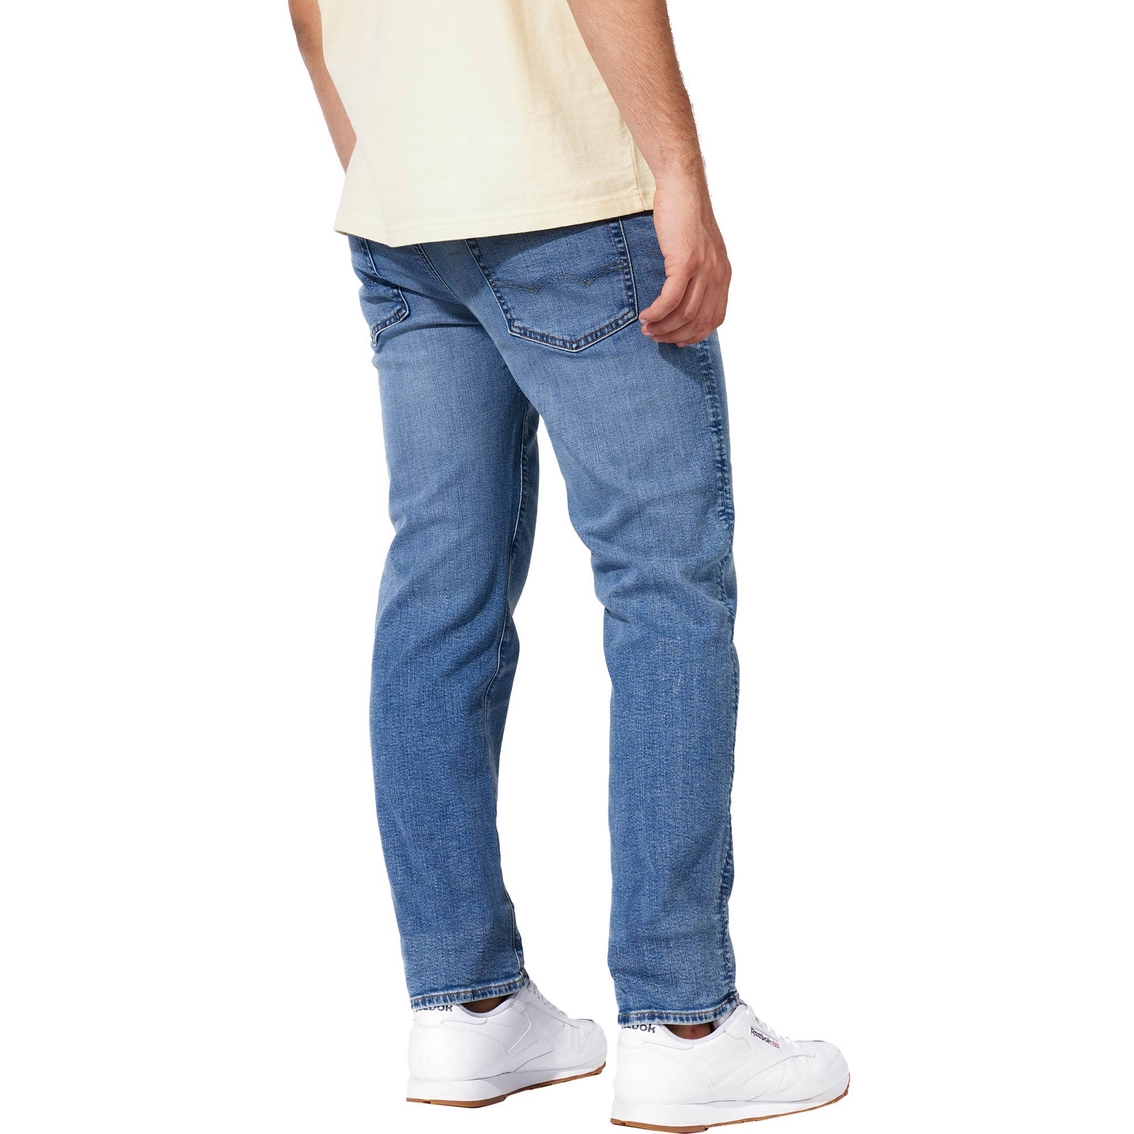 American Eagle Airflex+ Original Straight Jeans | Jeans | Clothing ...